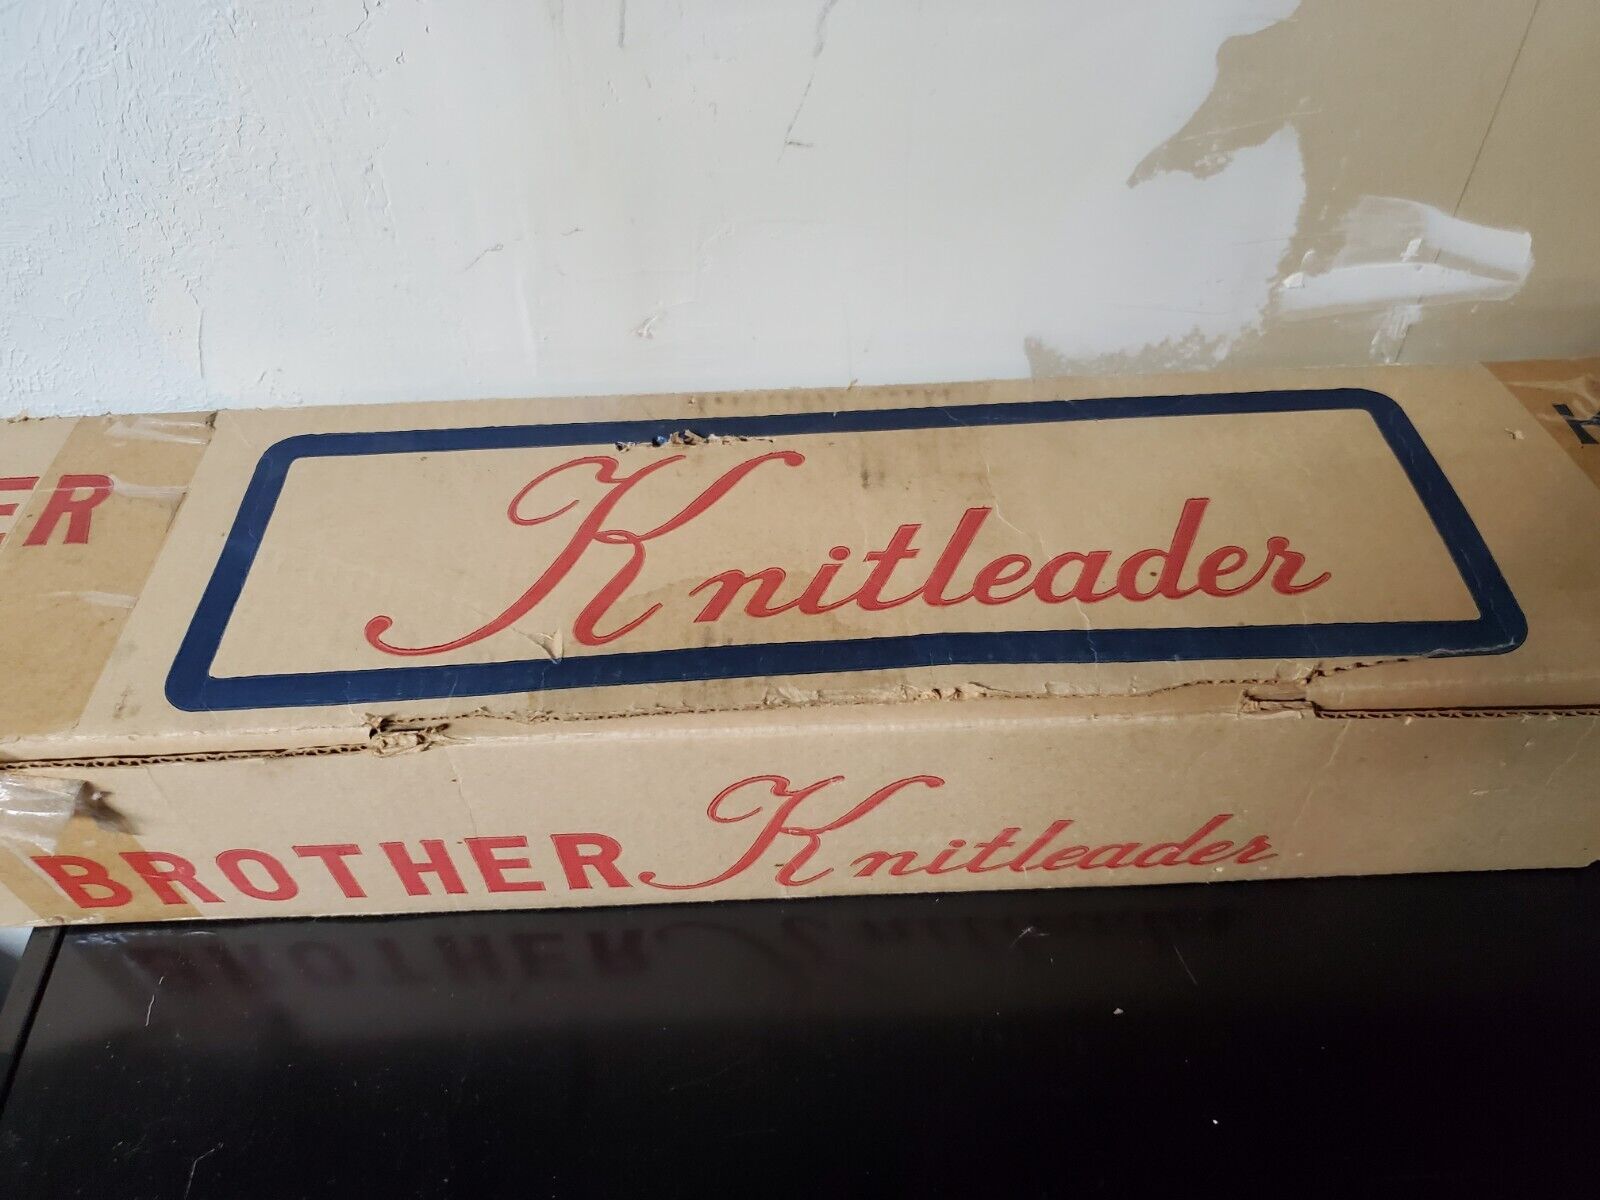 Brother Knitleader Model Kl-113, For Machine Knitting, Good Condition